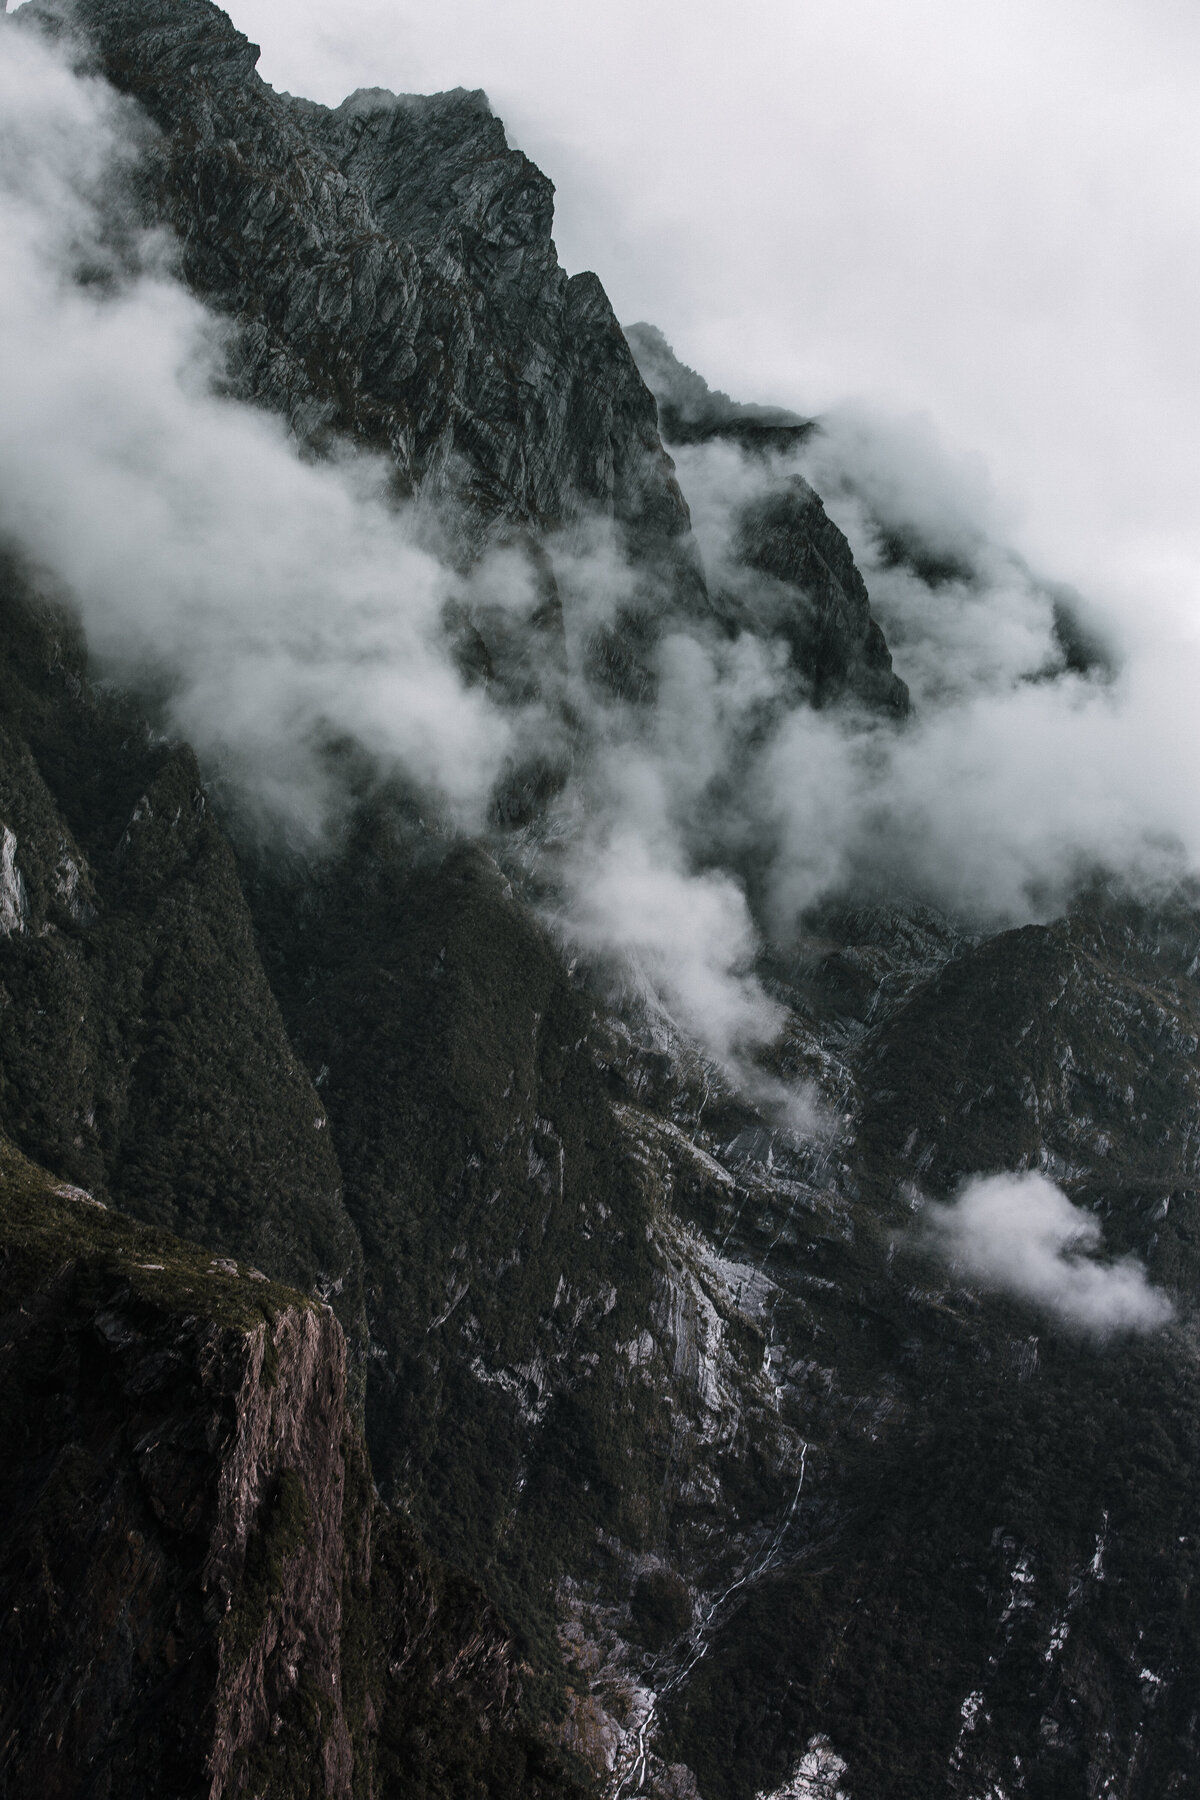 Clouds covering mountains in Milford Sound, New Zealand